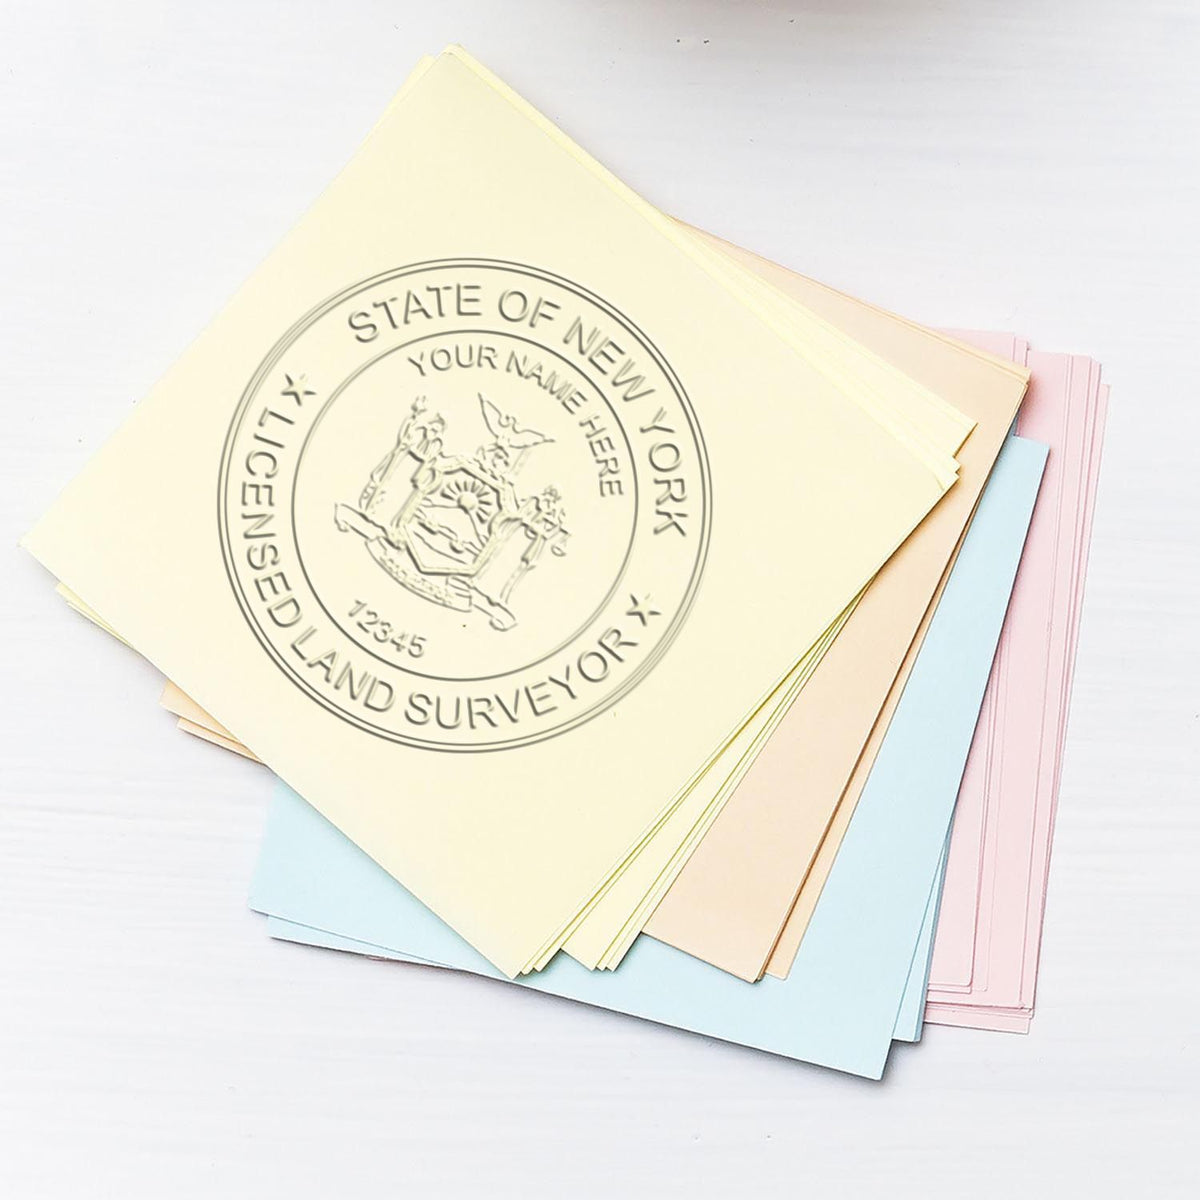 An in use photo of the Gift New York Land Surveyor Seal showing a sample imprint on a cardstock